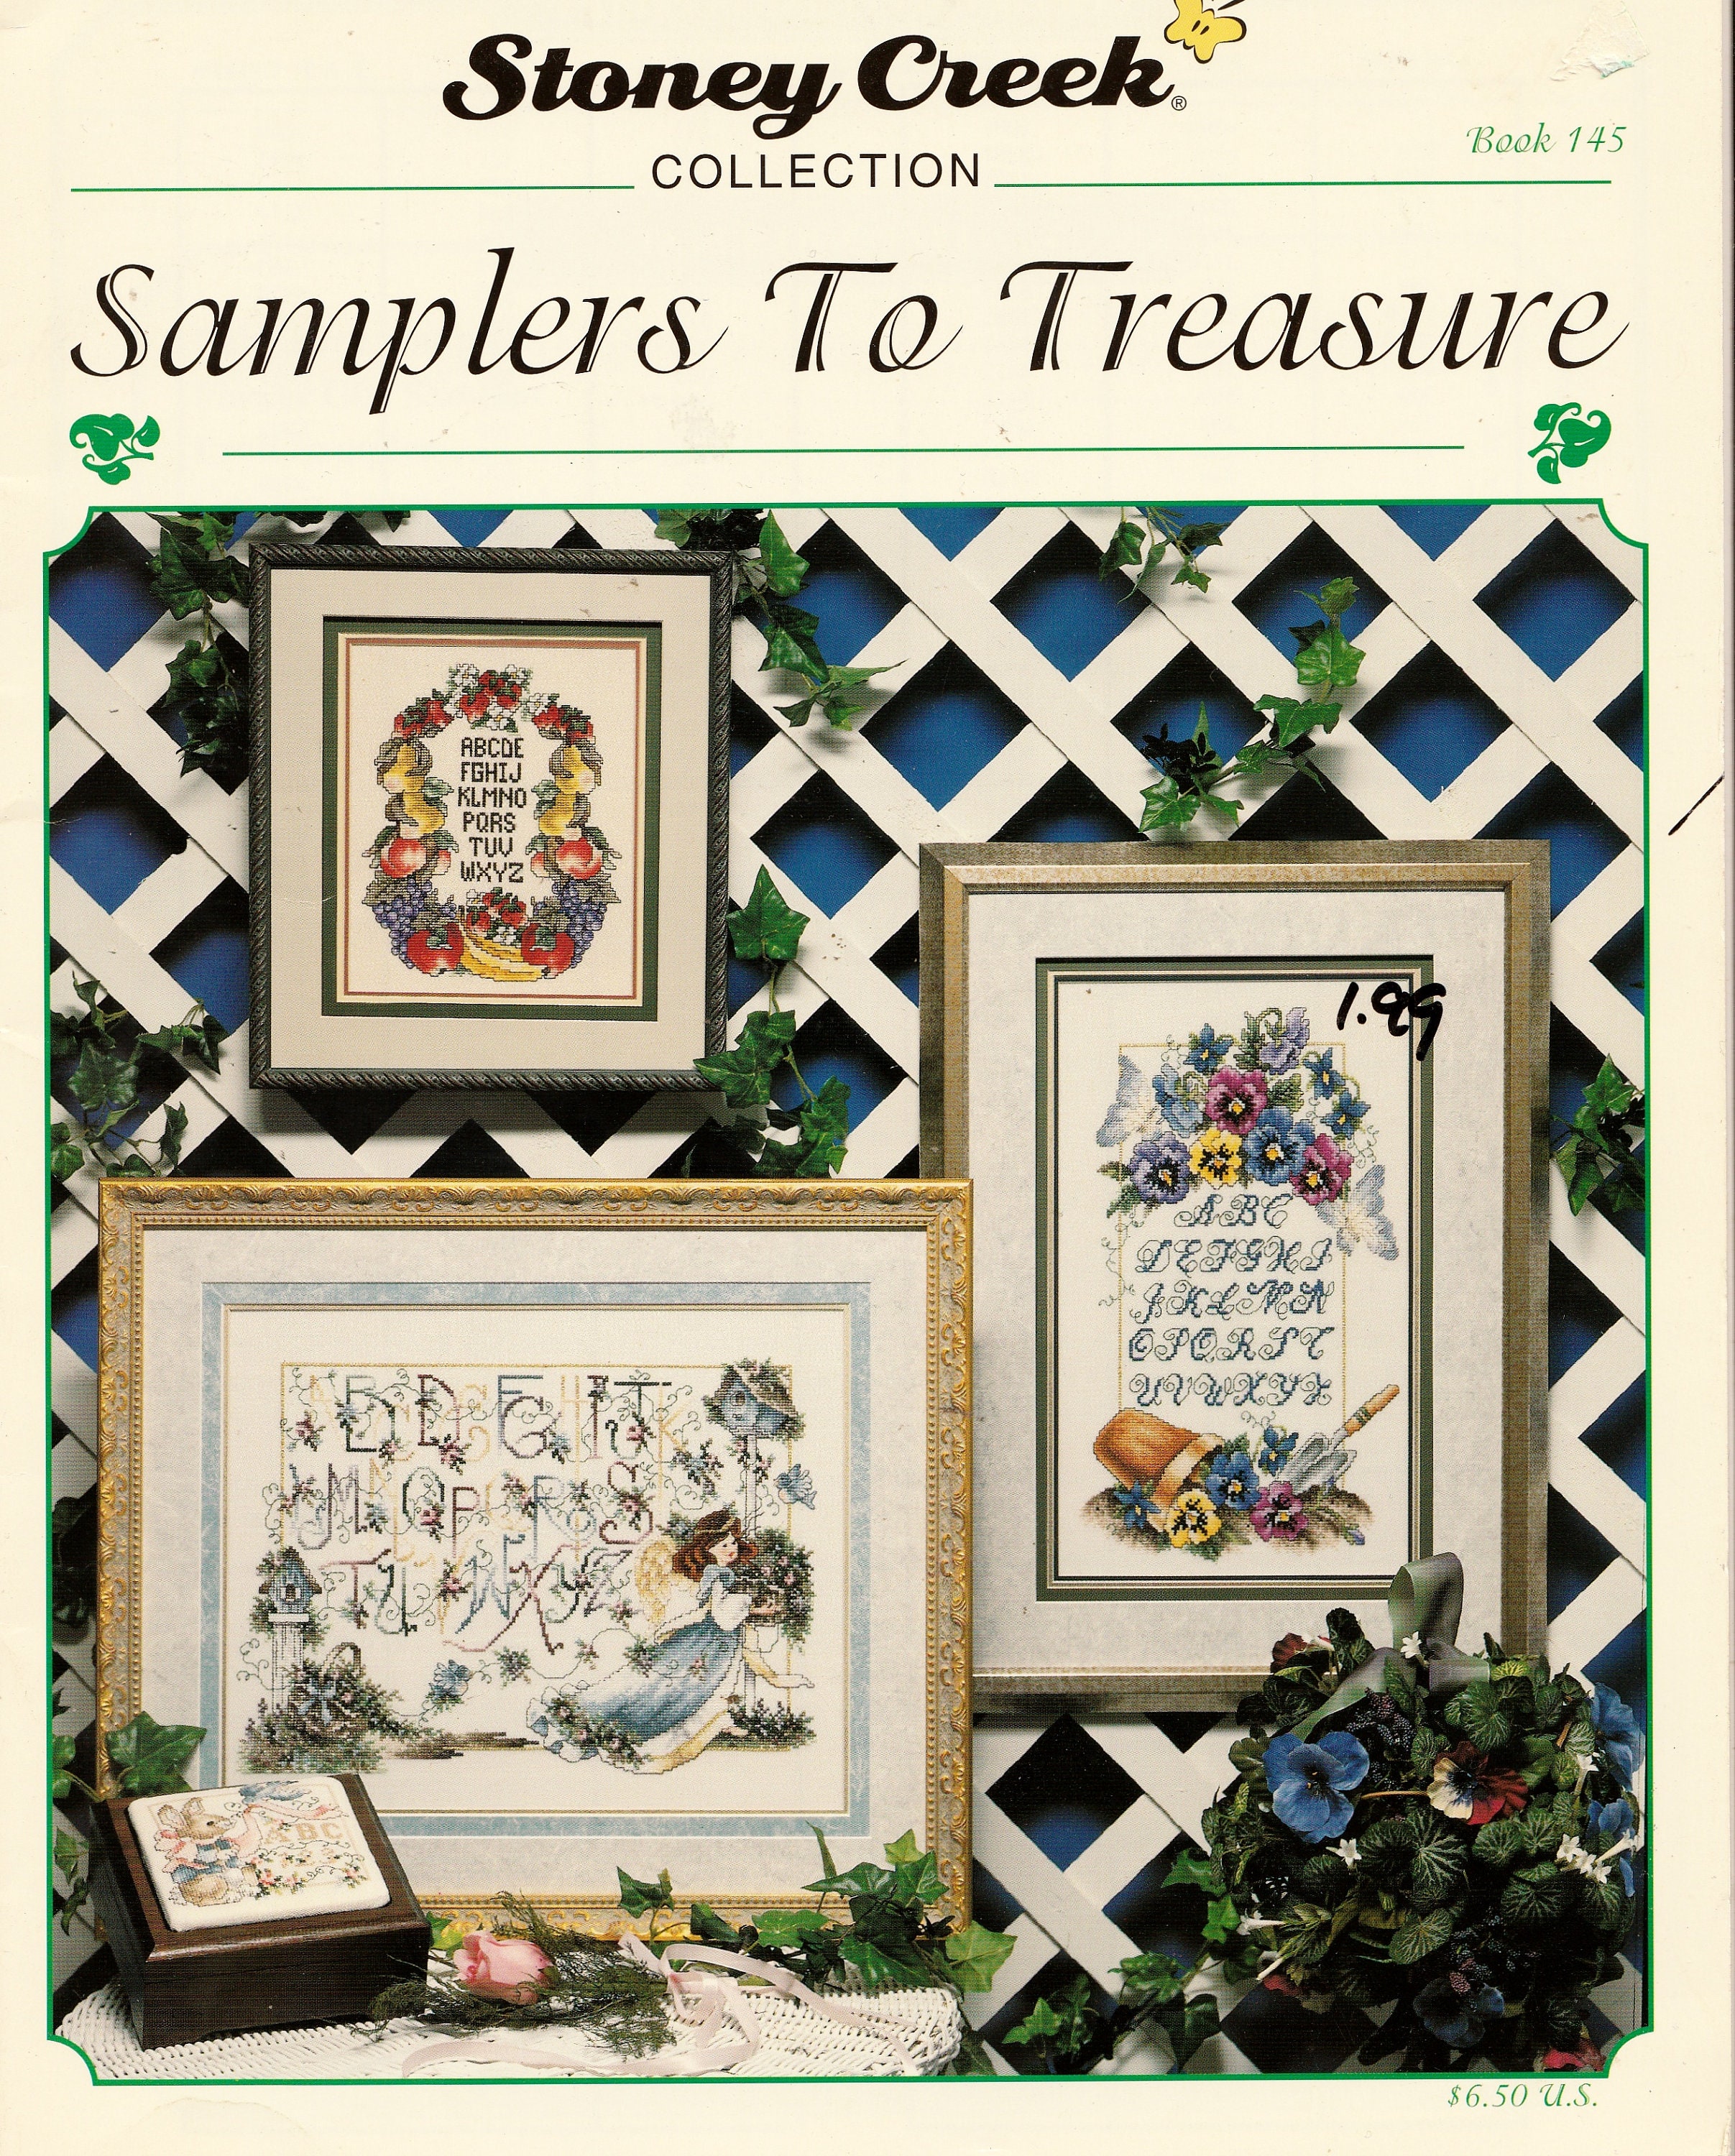 Sample collections. Stoney Creek. Stoney Creek xsd. Stoney Creek Cross Stitch collection 1996. +Stoney +Creek +collection +2007.